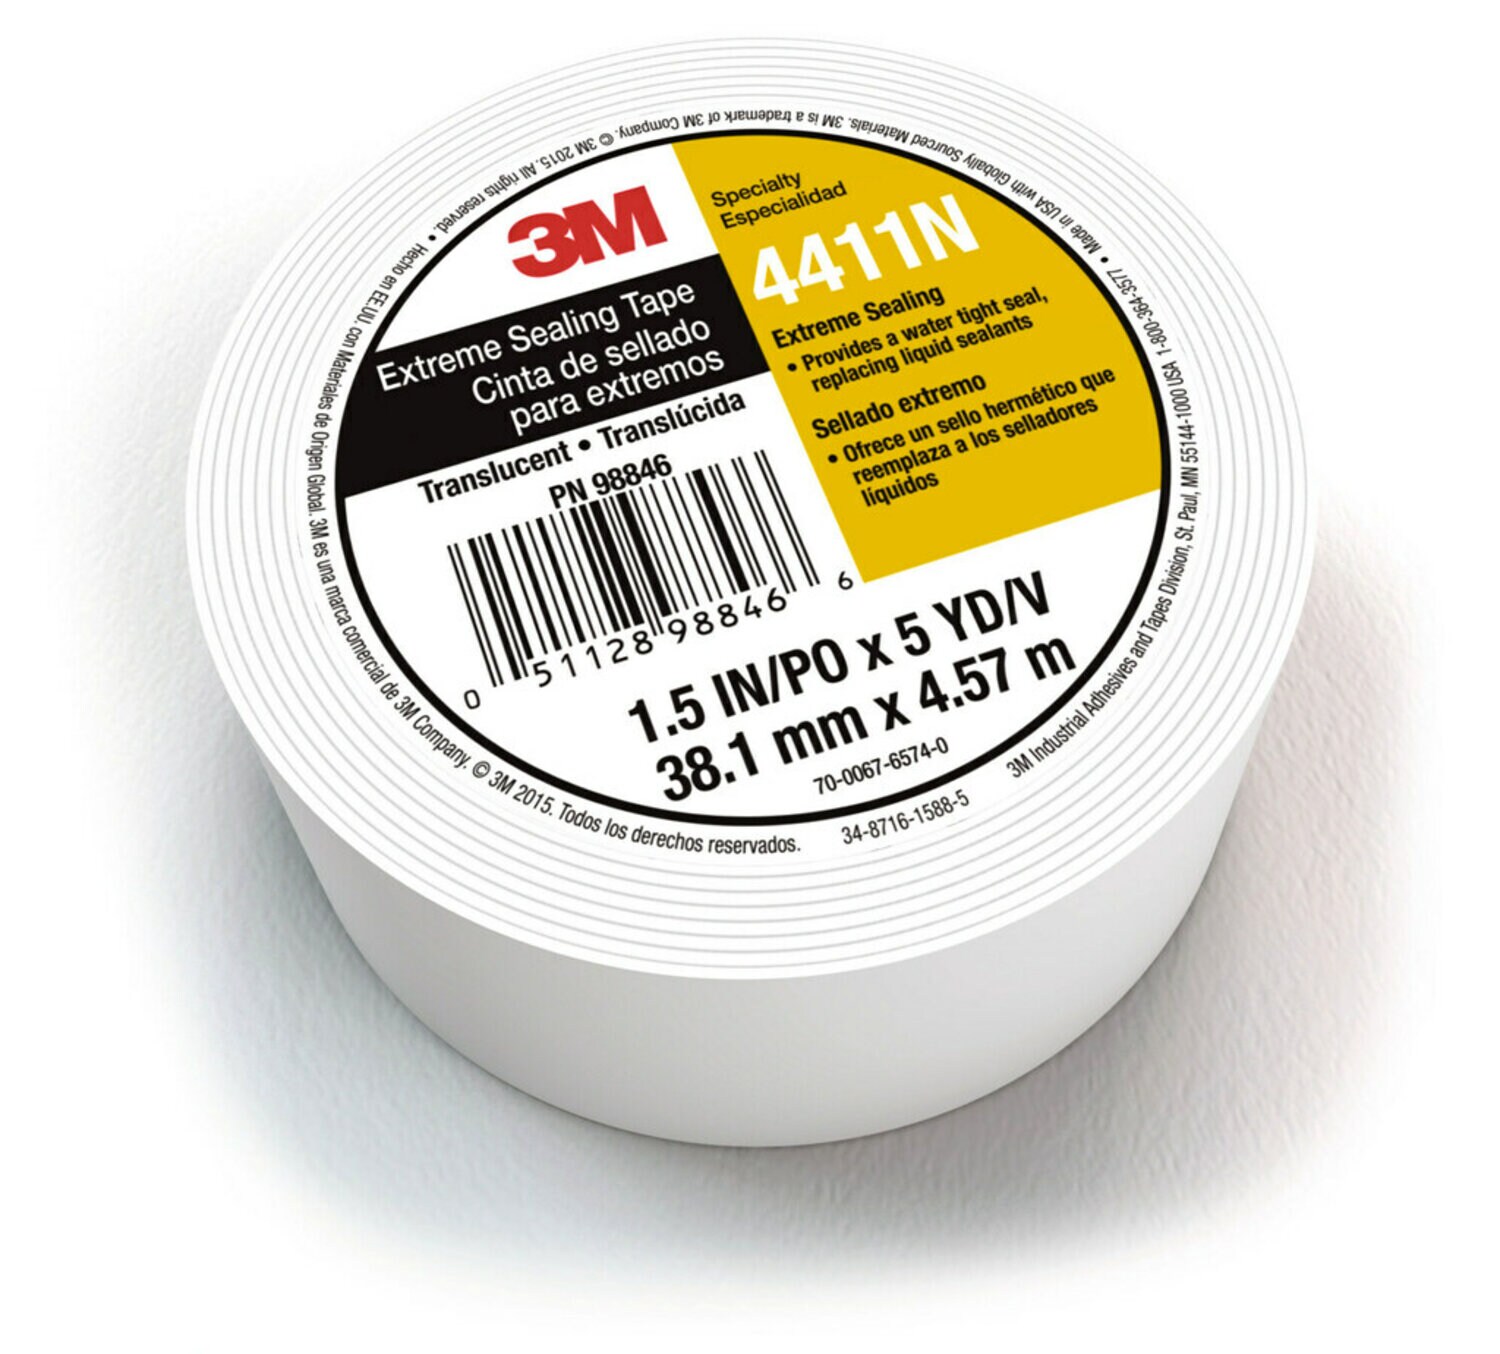 7000049735 - 3M Extreme Sealing Tape 4411N Translucent, 24 in x 36 yd, 1 roll per
case